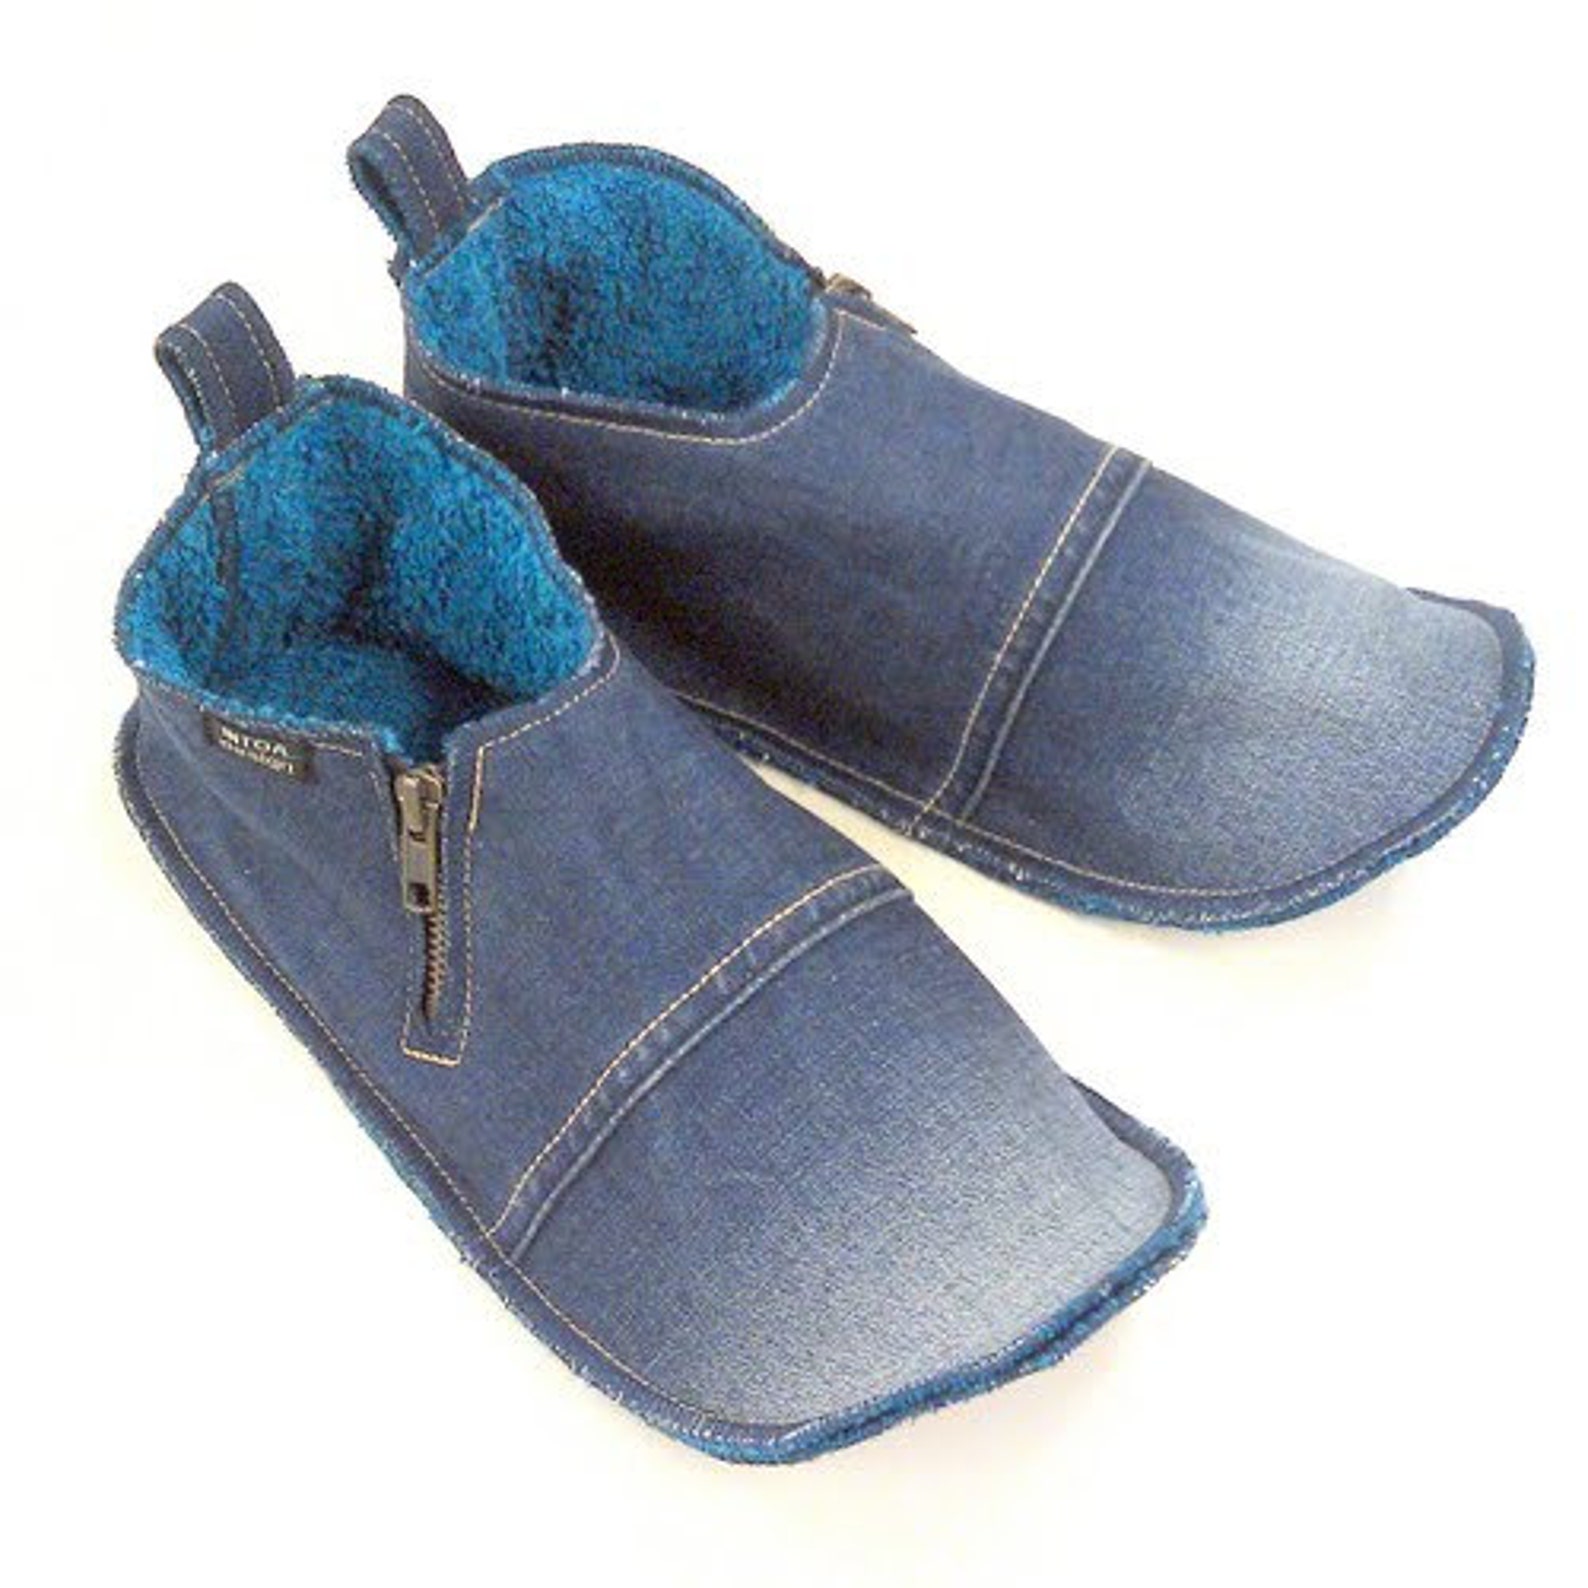 Denim Slippers of Recycled Jeans adults zippered | Etsy